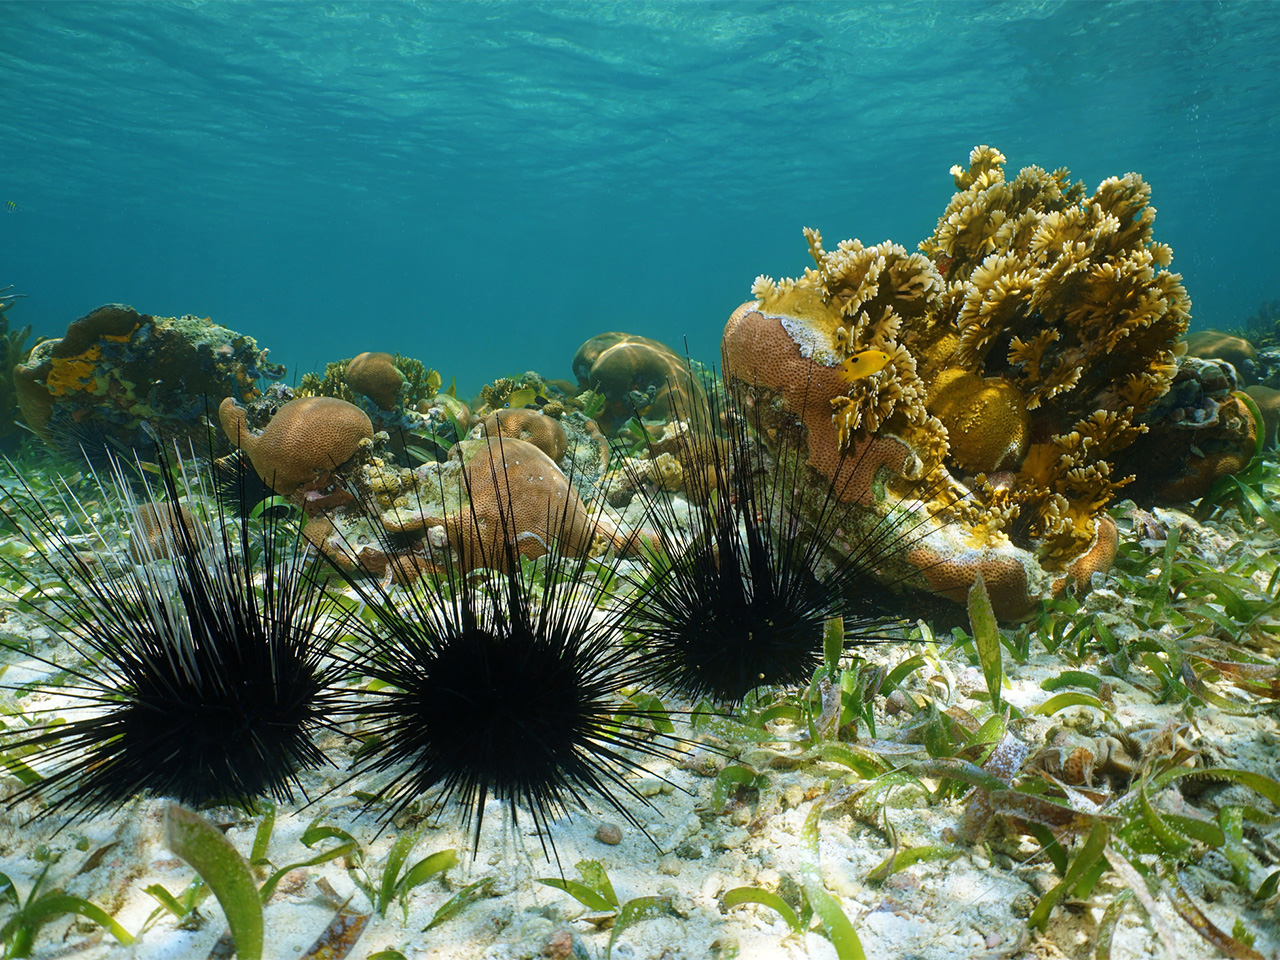 A trio of black long spined sea urchins on a sandy sea floor.